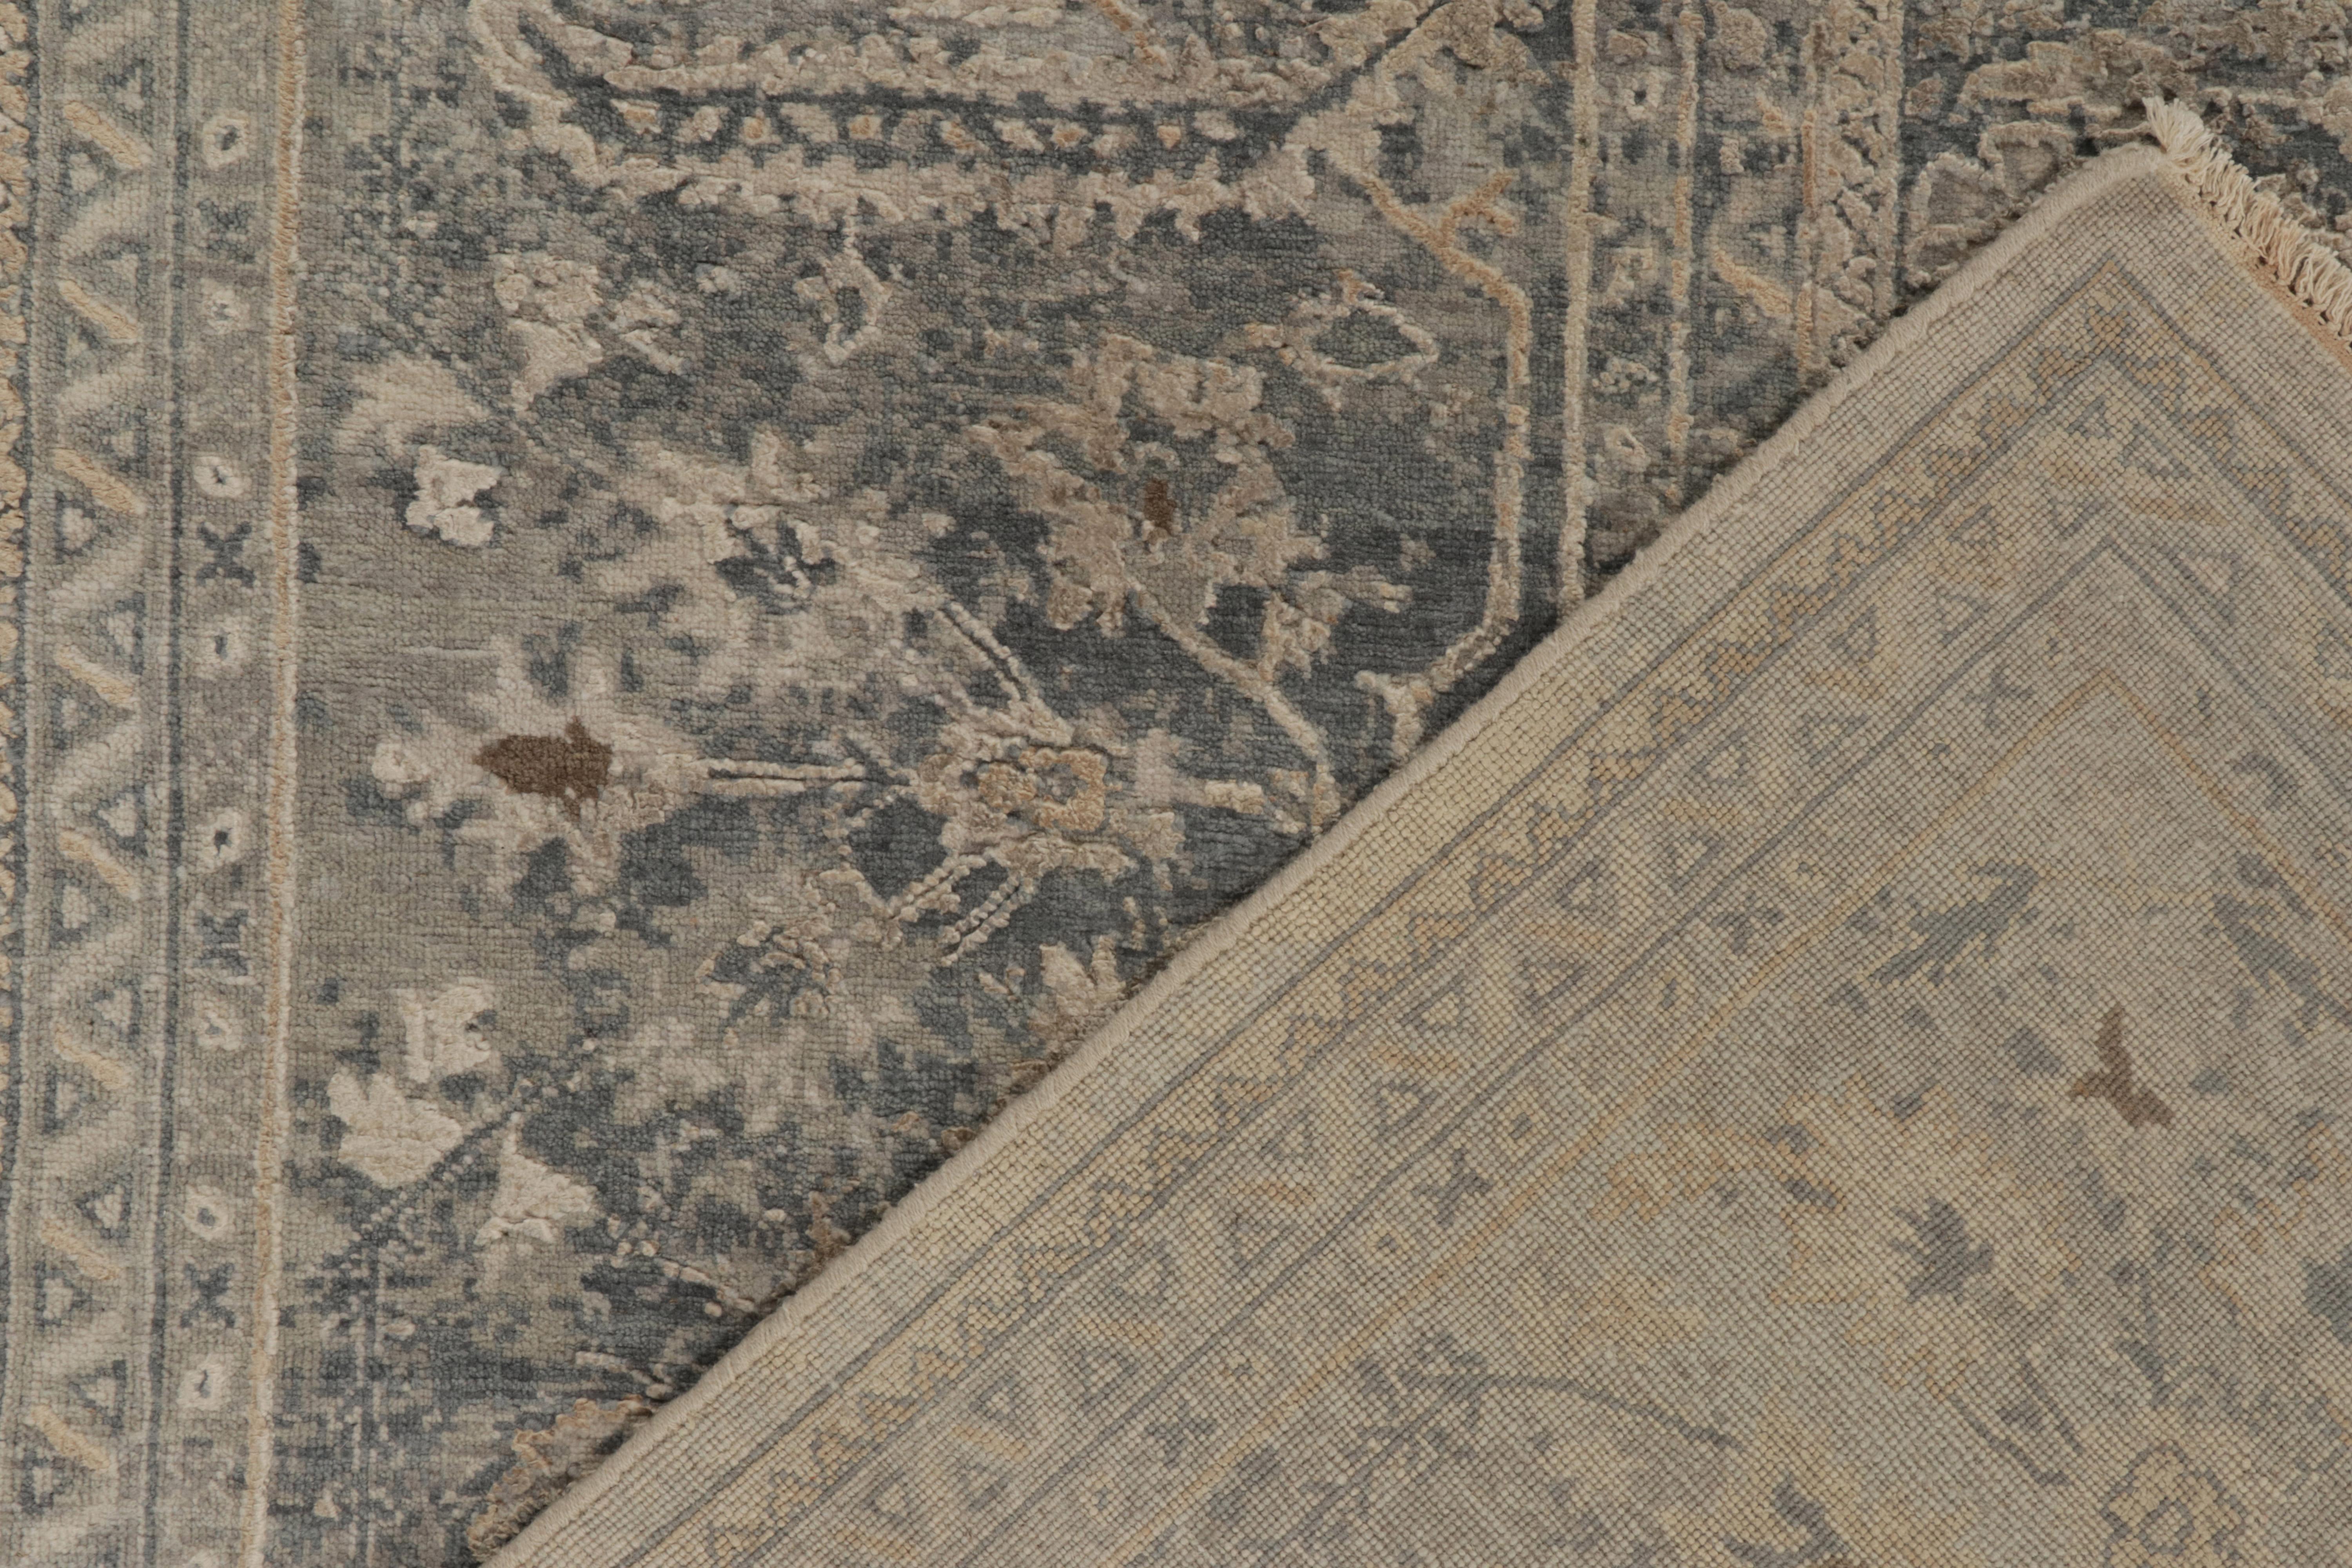 Silk Rug & Kilim’s Classic Style Rug in Silver-Gray, Blue & Beige Floral Pattern For Sale